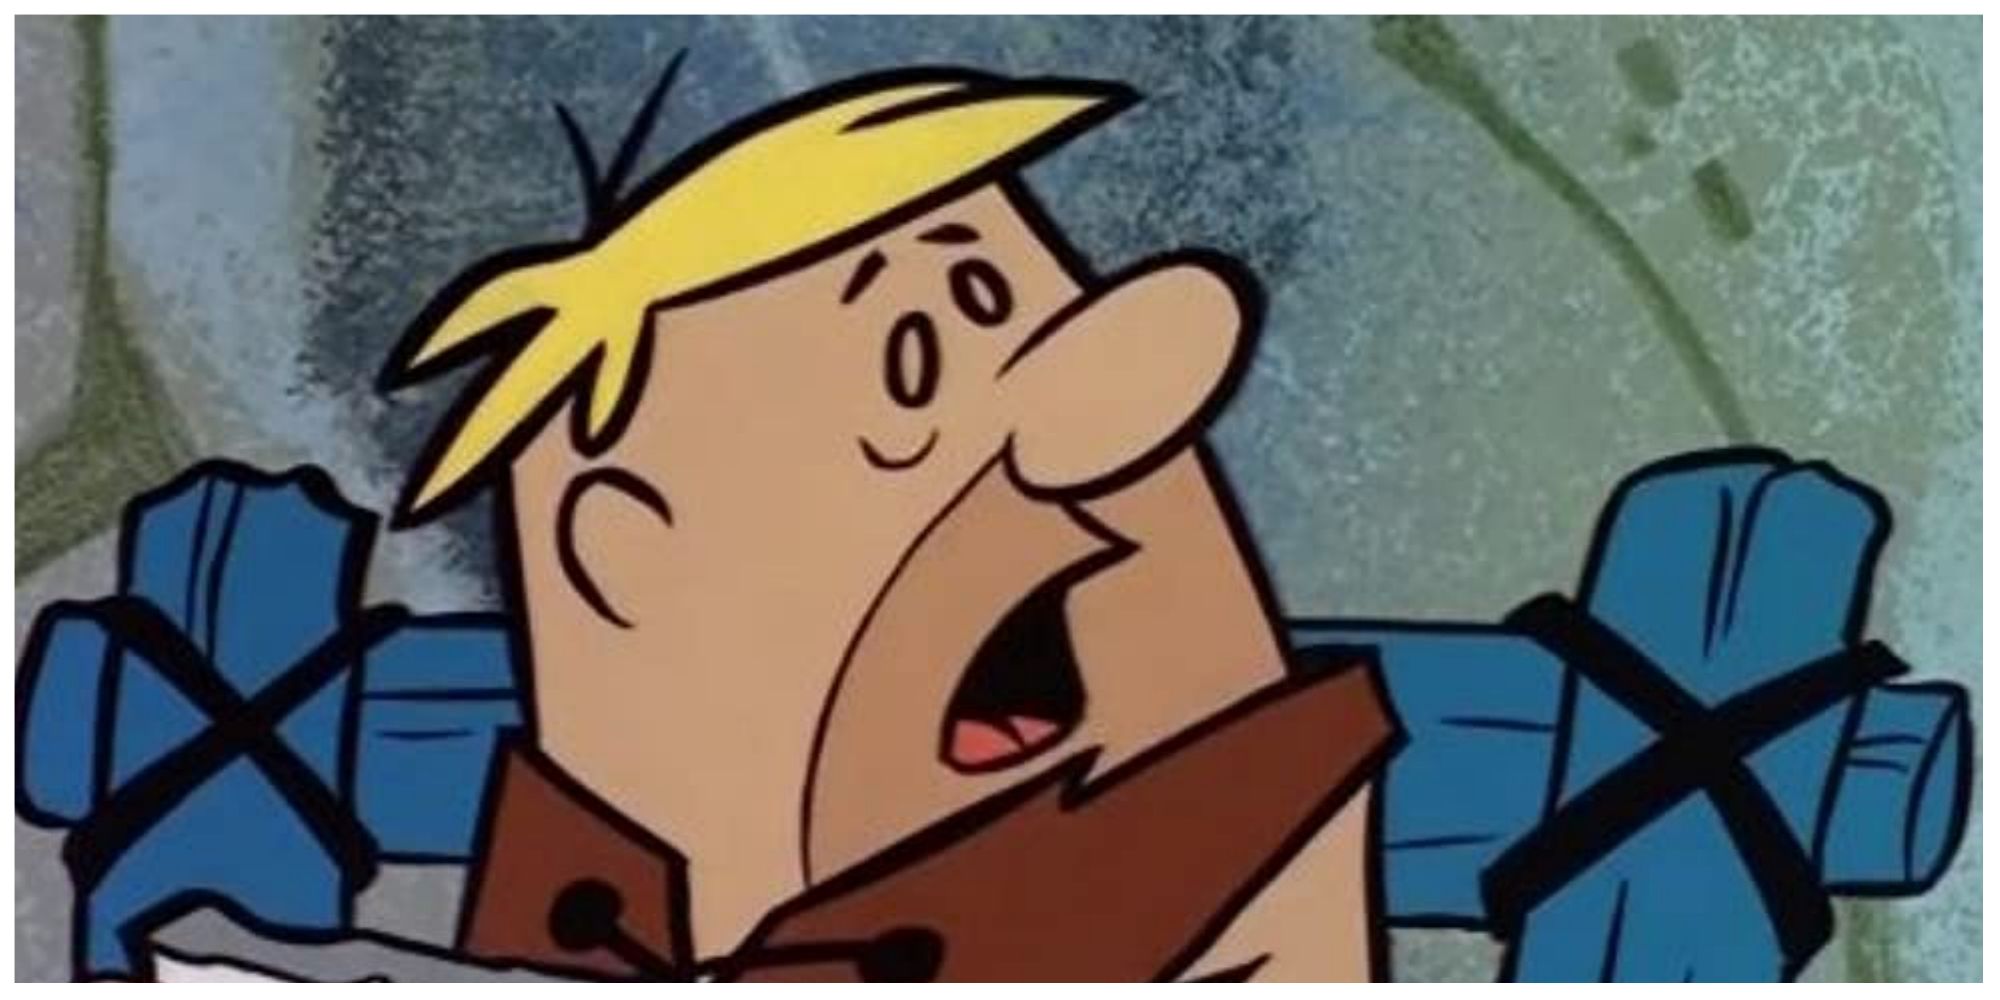 Barney Rubble from The Flinstones